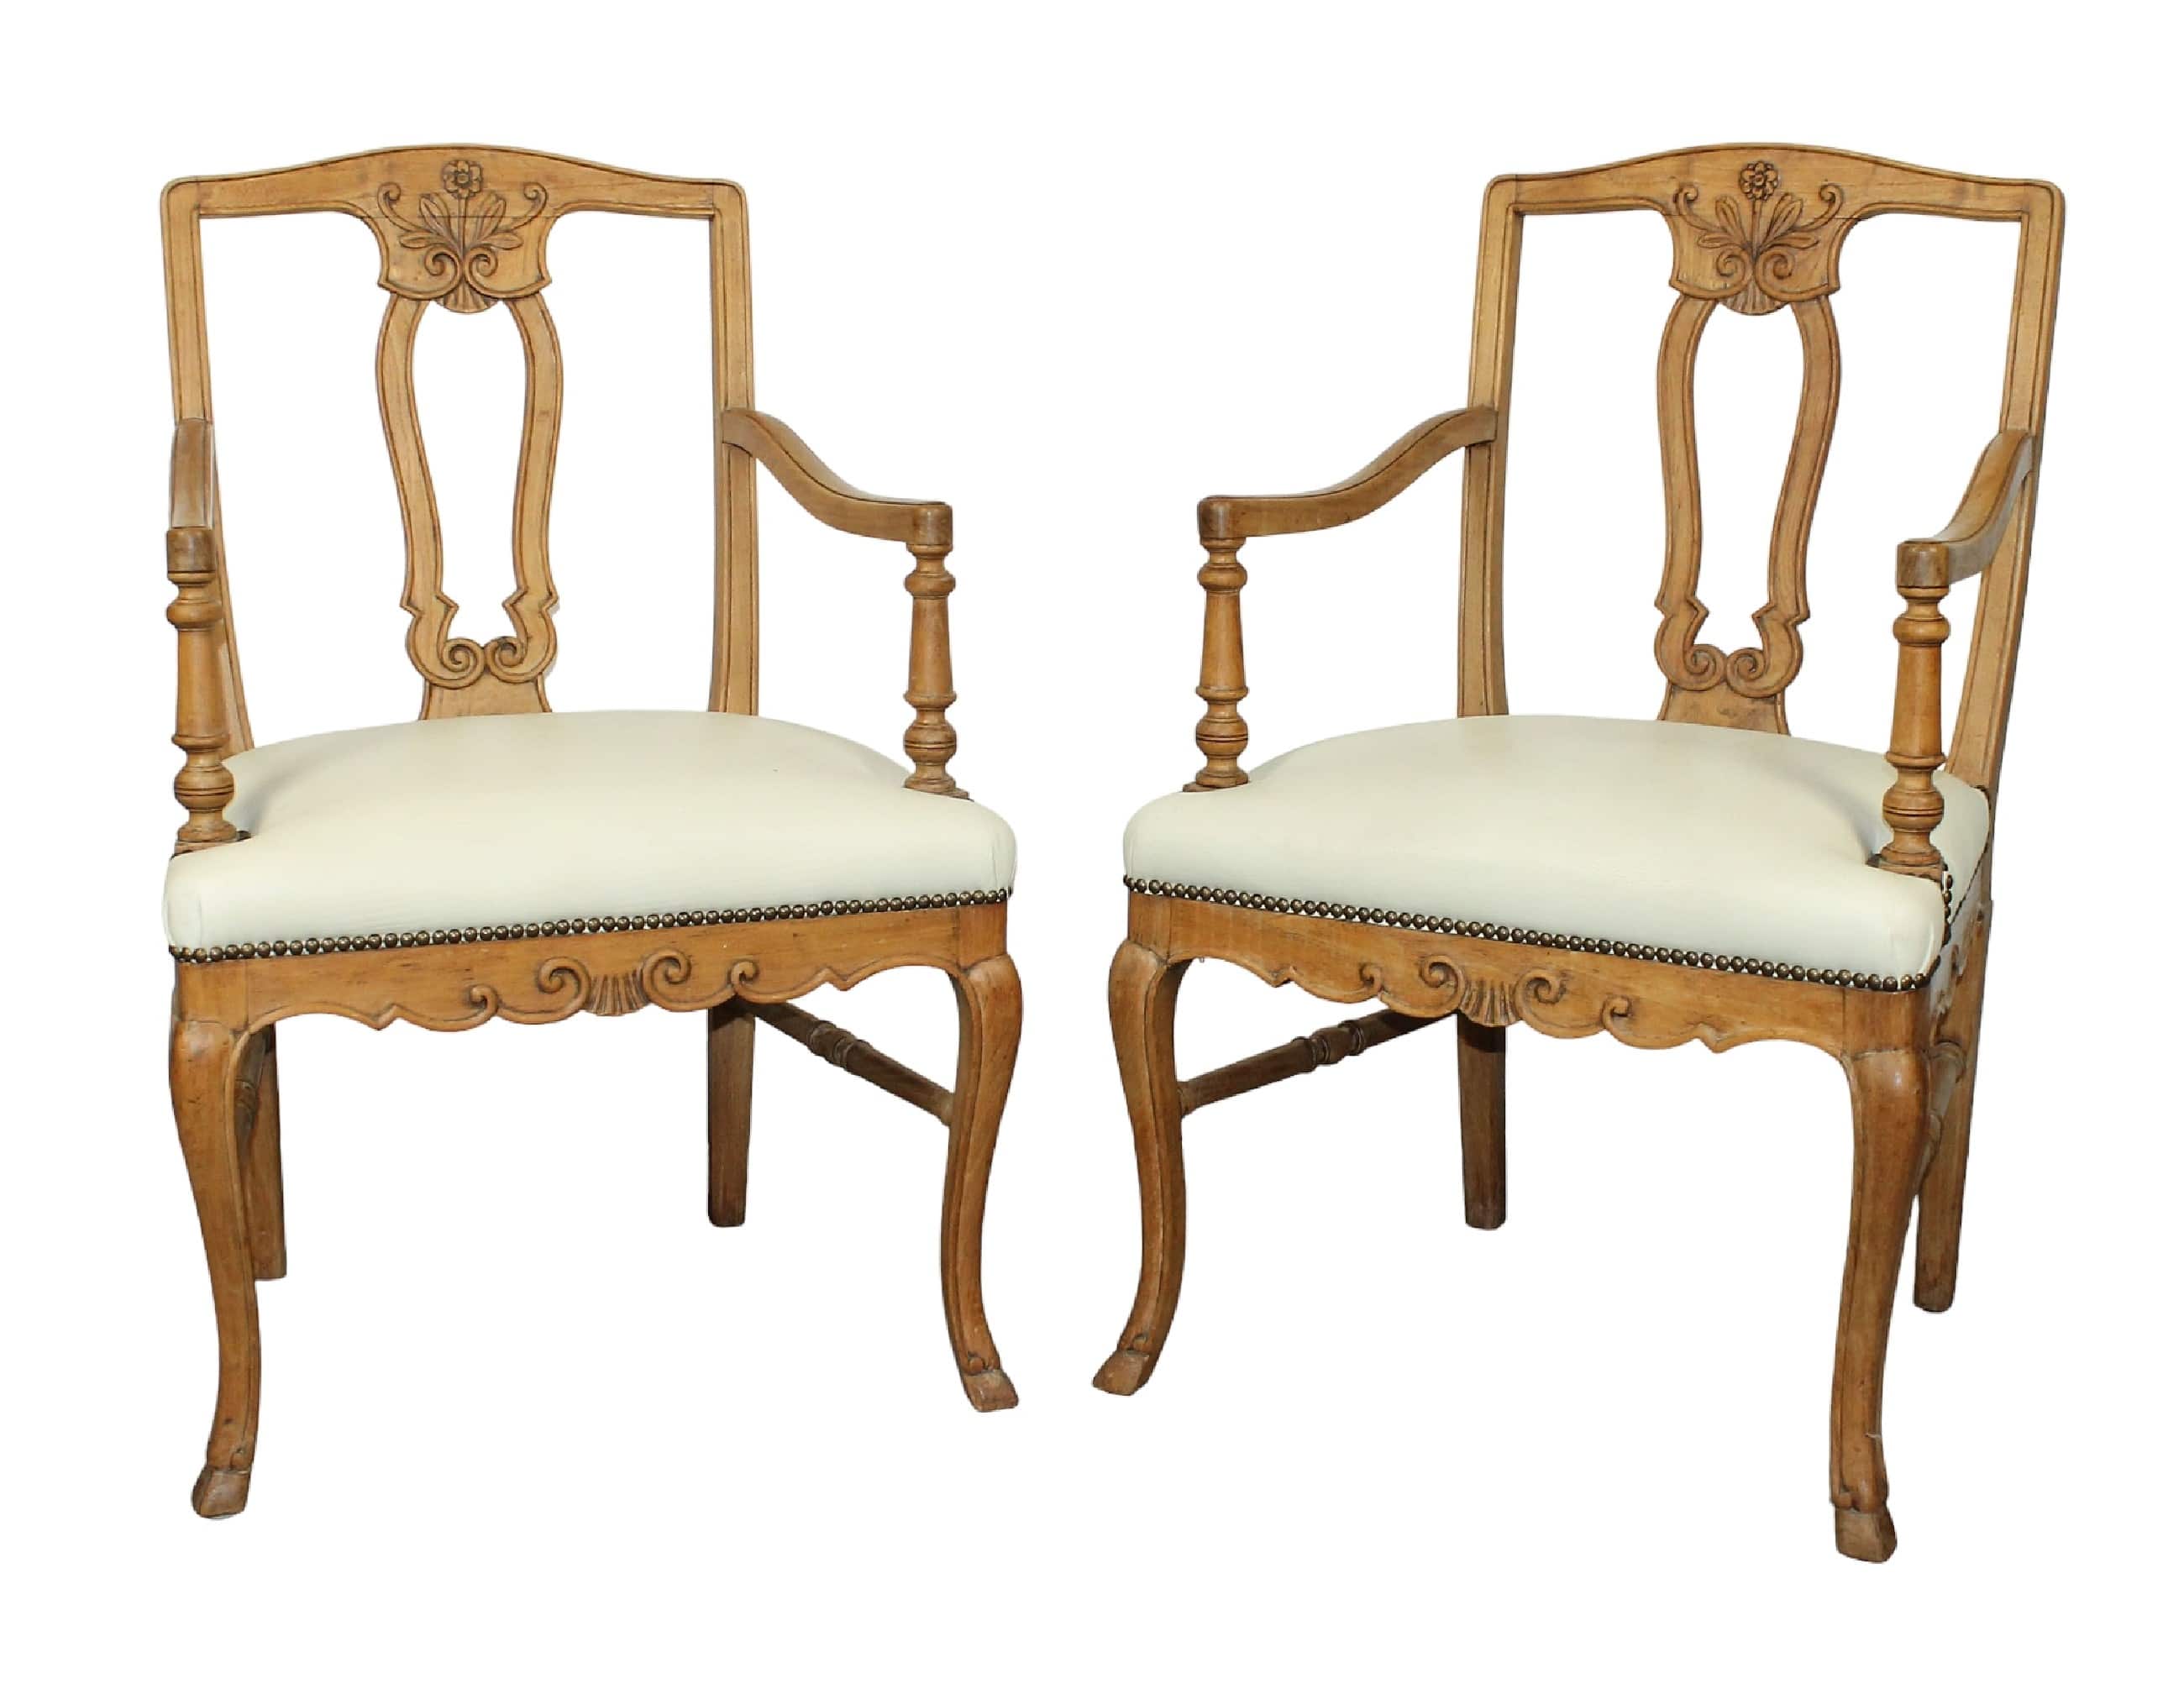 Pair of French Provincial armchairs in oak with leather seats
